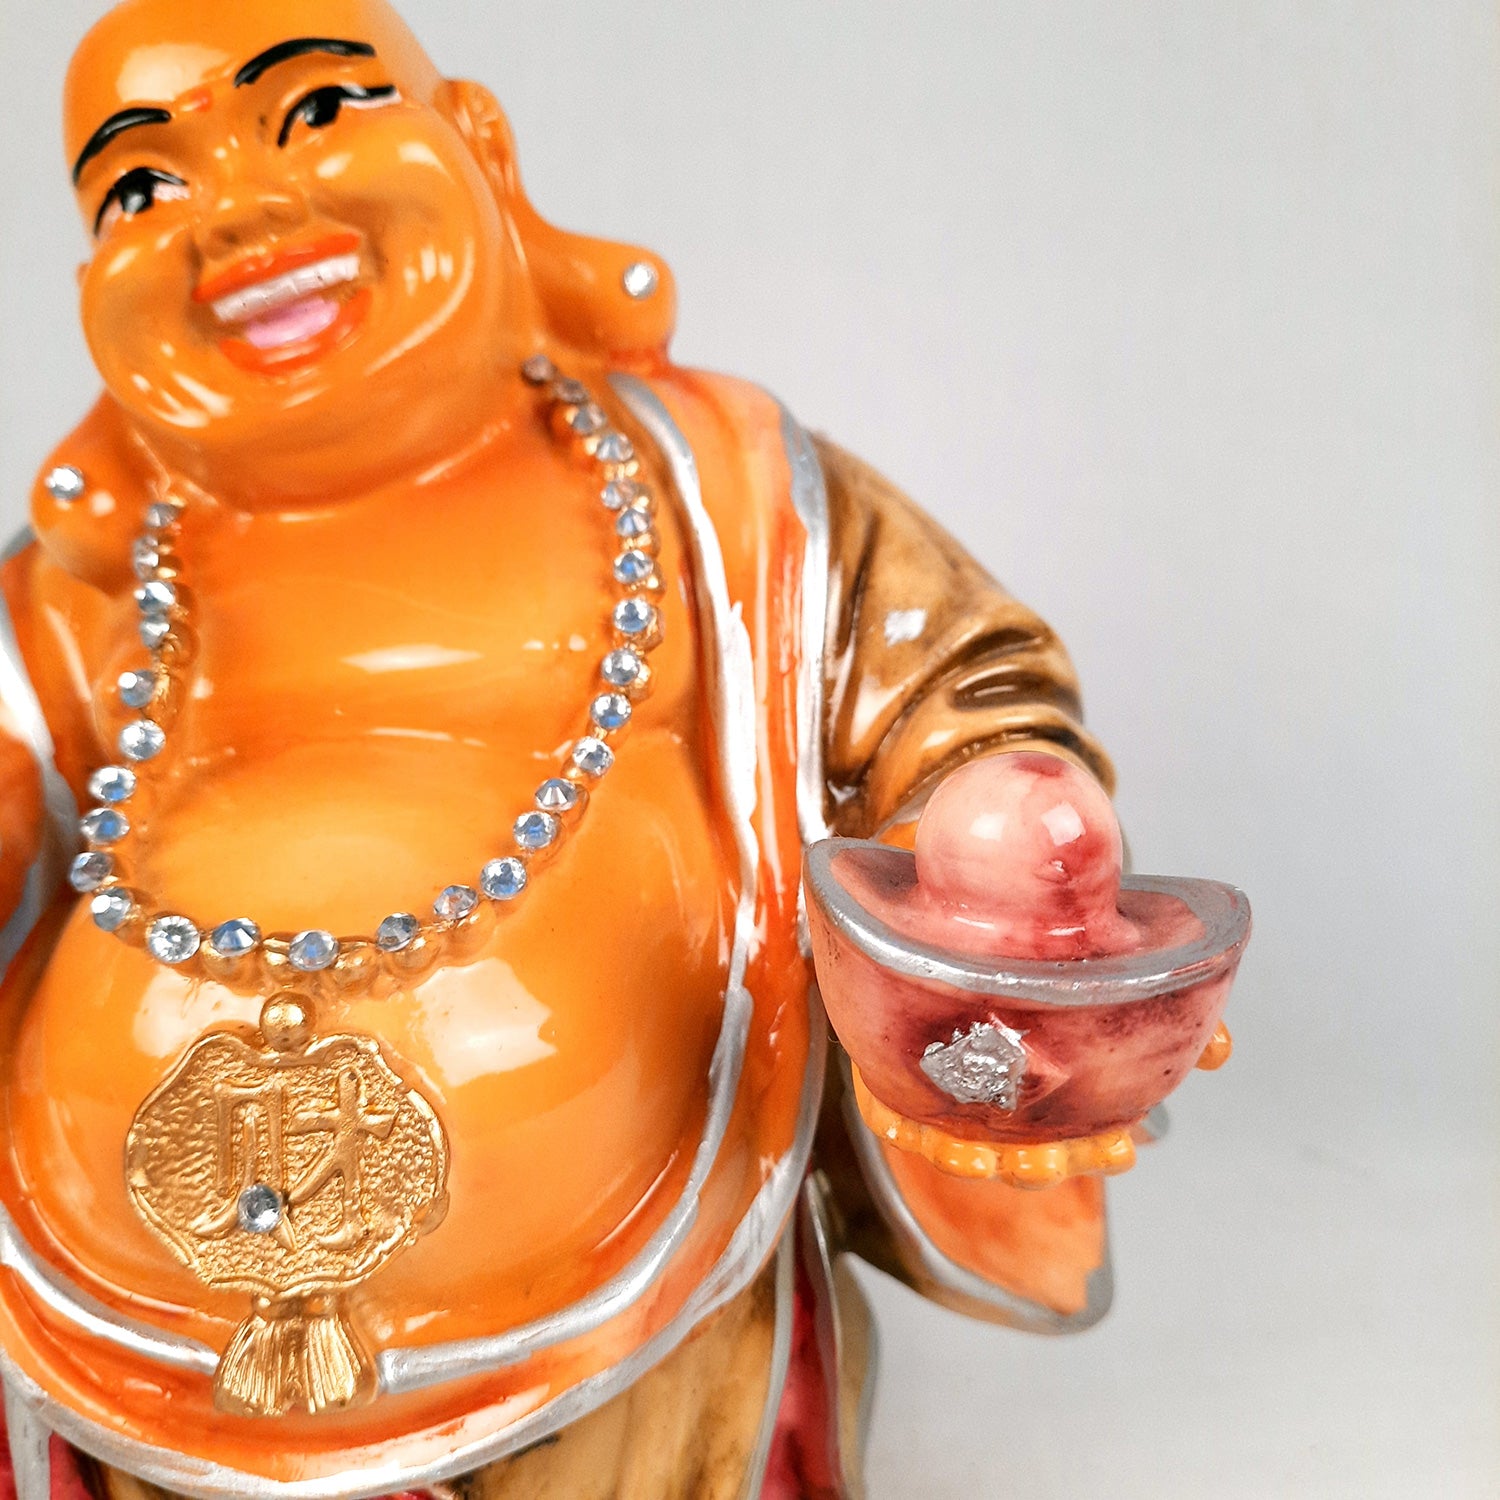 Laughing Buddha Statue | Happy Man Showpiece - for Money, Wealth, Health, Good Luck, Home, Table & Office Decor & Gift - 10 Inch - Apkamart